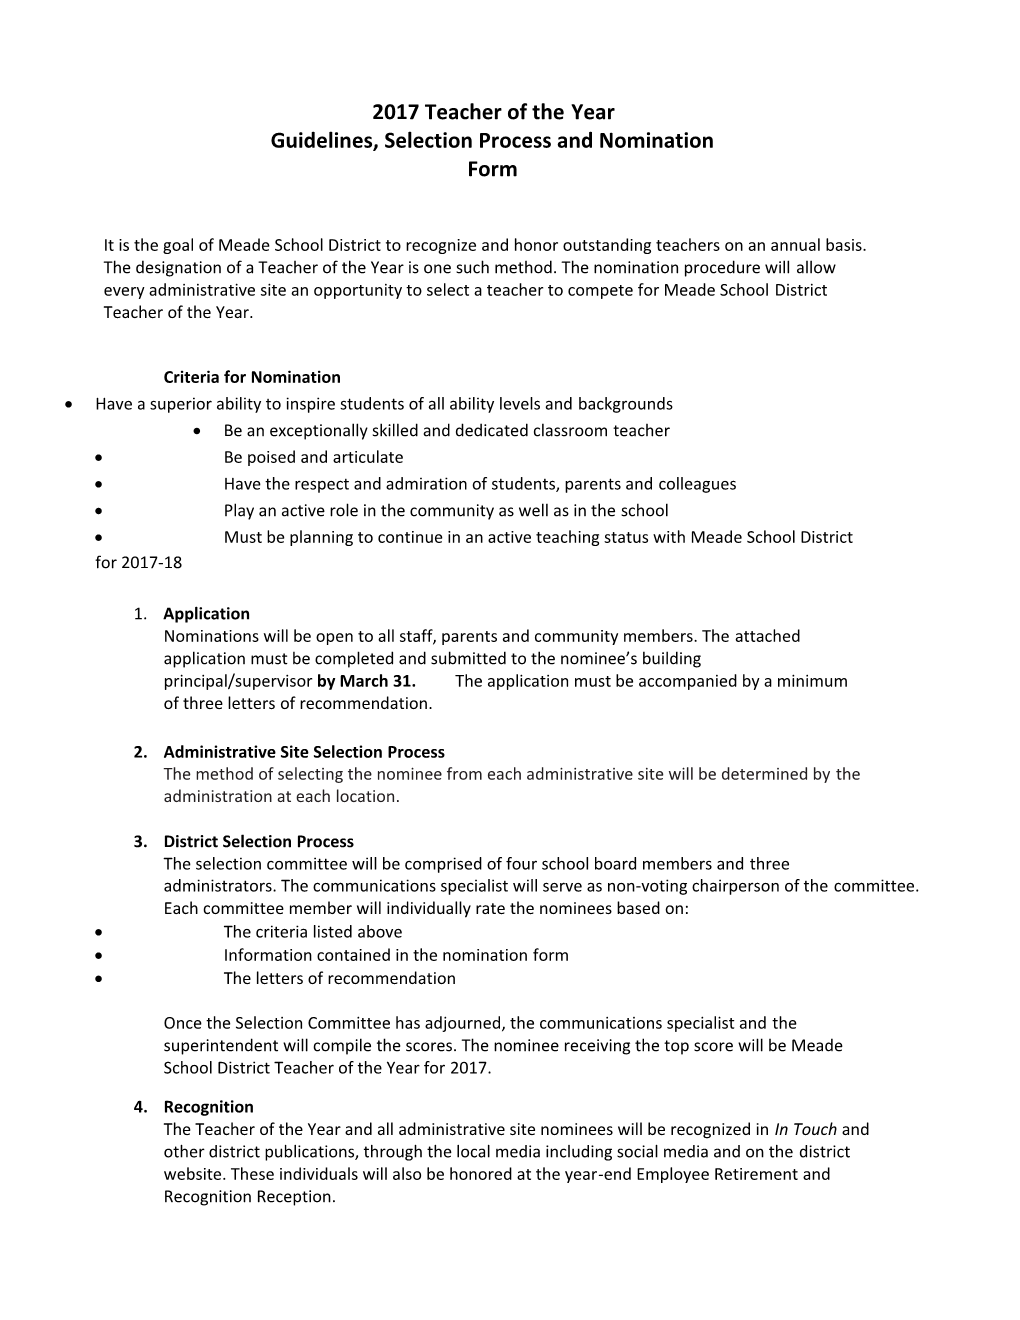 2014 Teacher of the Year Nomination Form and Criteria